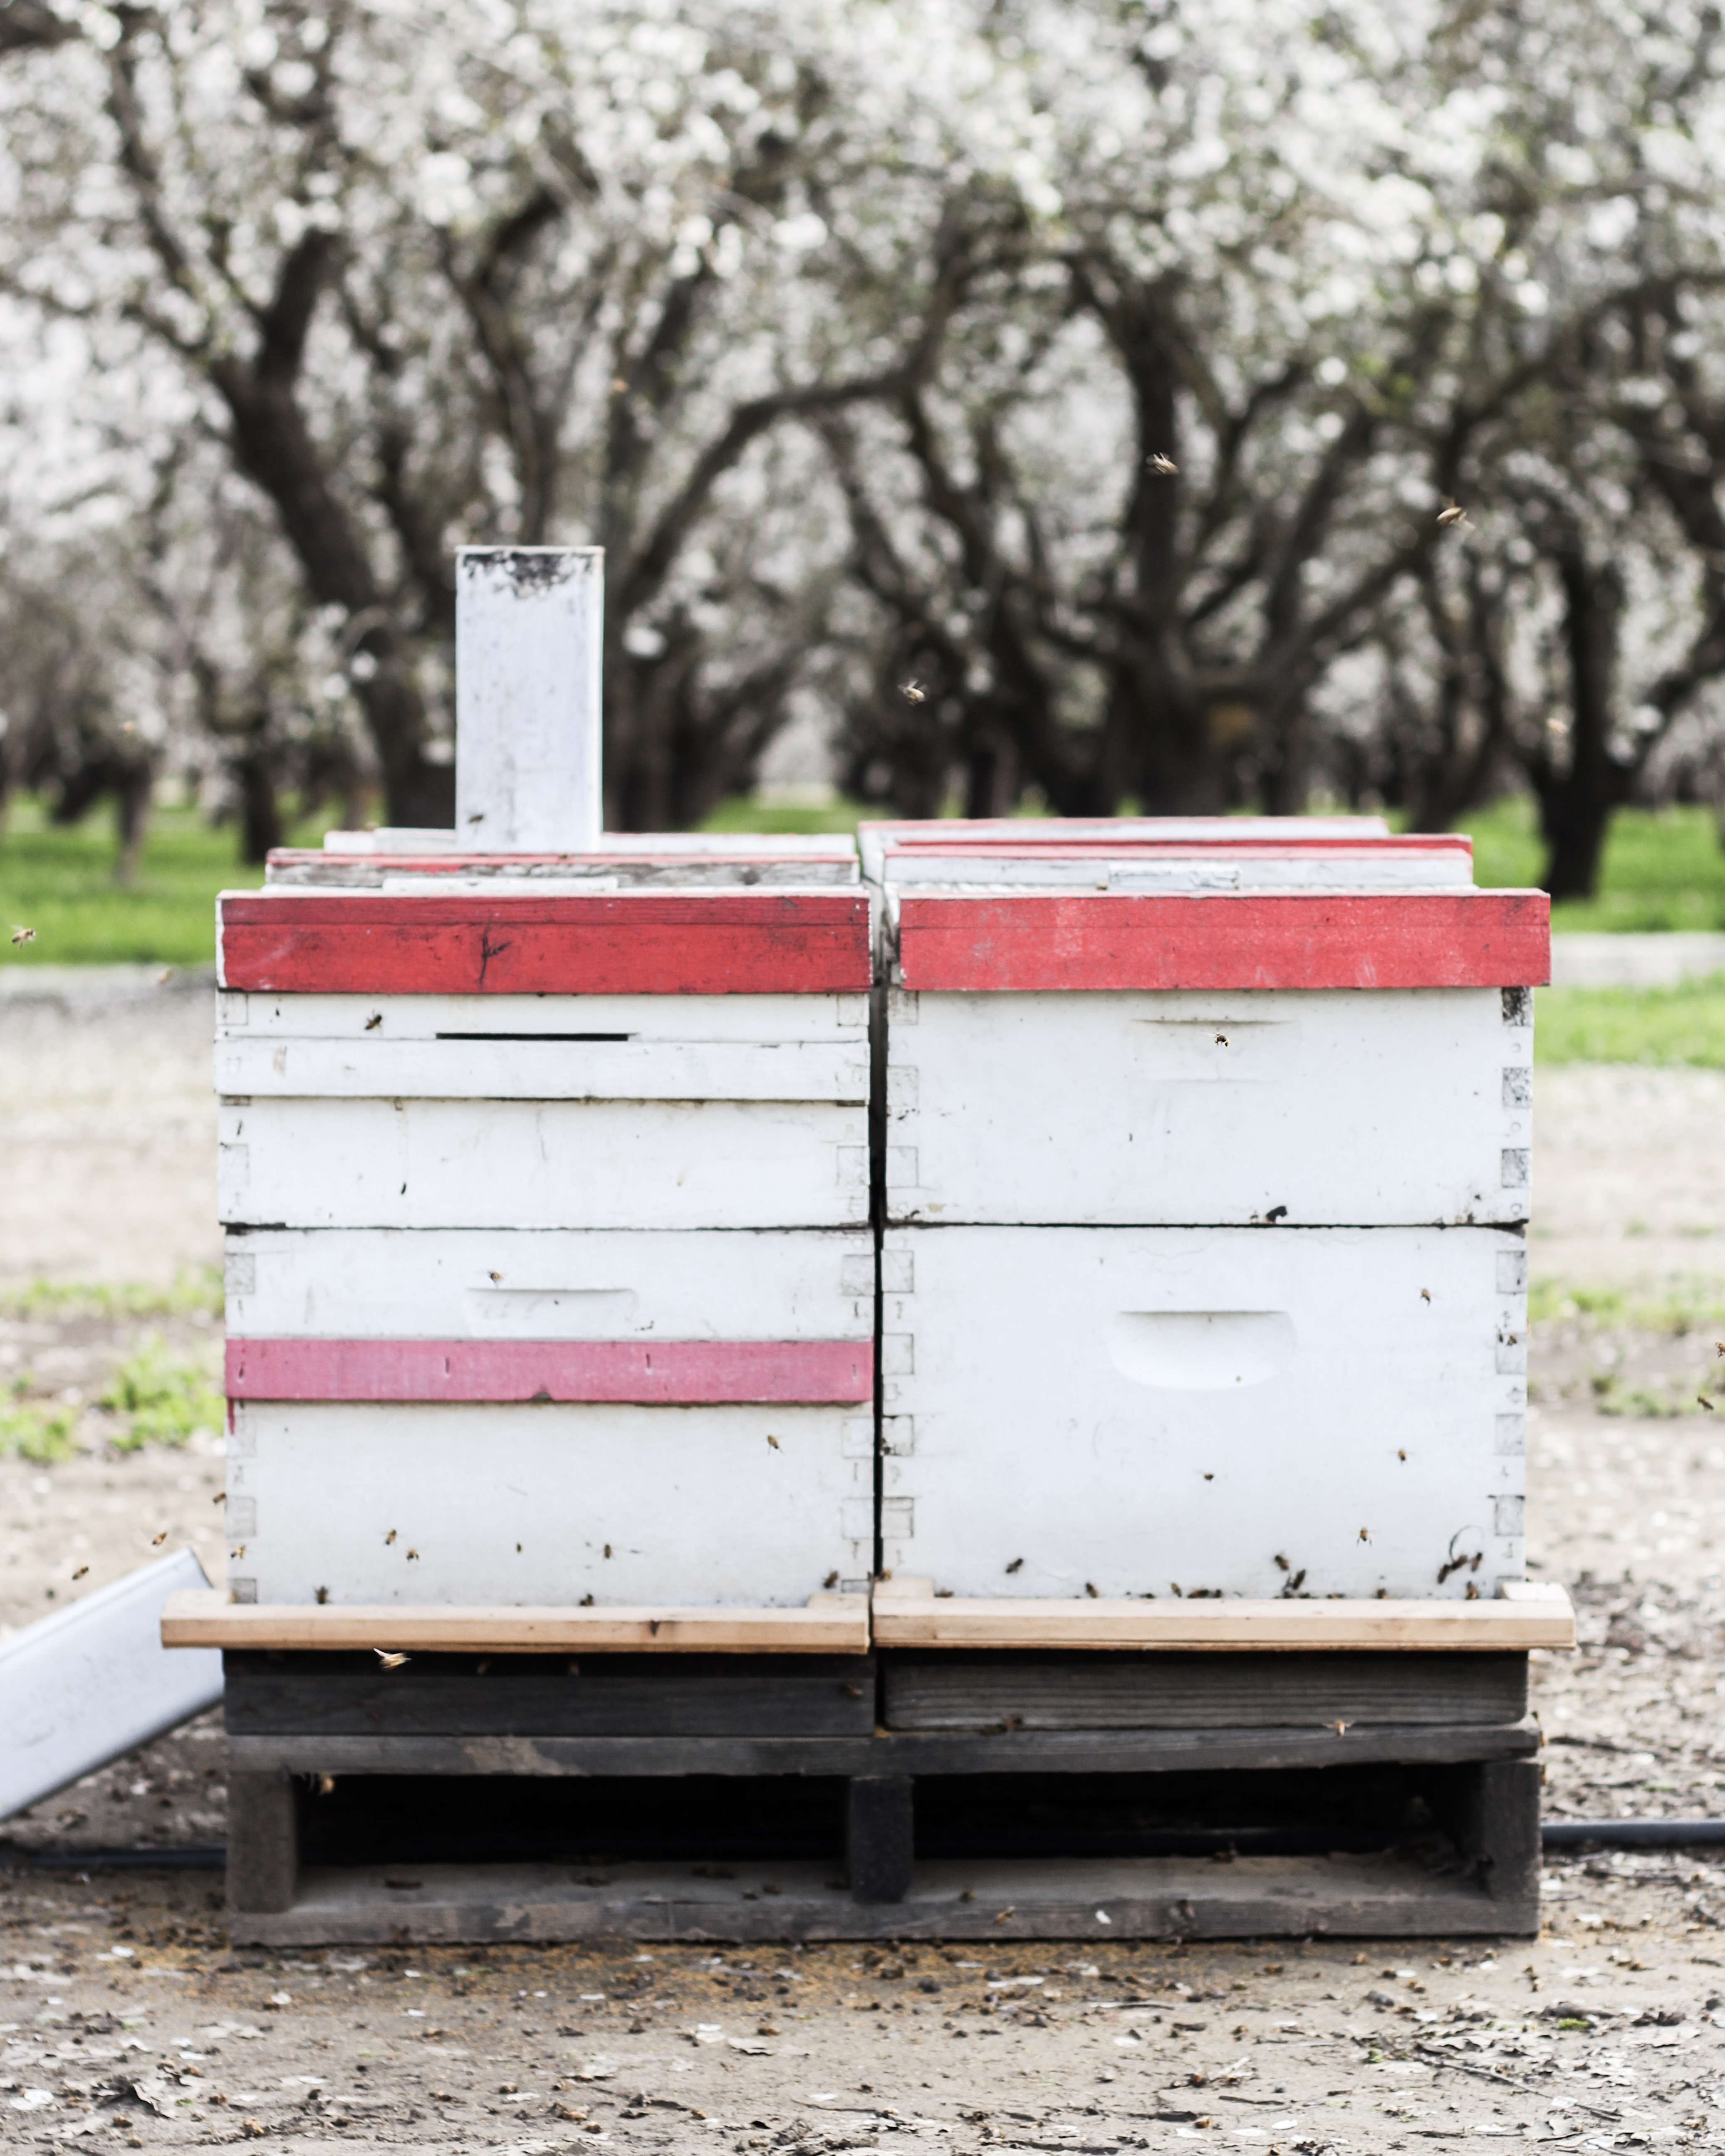 My Orchard Experience: The Top 3 Things I Learned About Almonds in Sacramento!